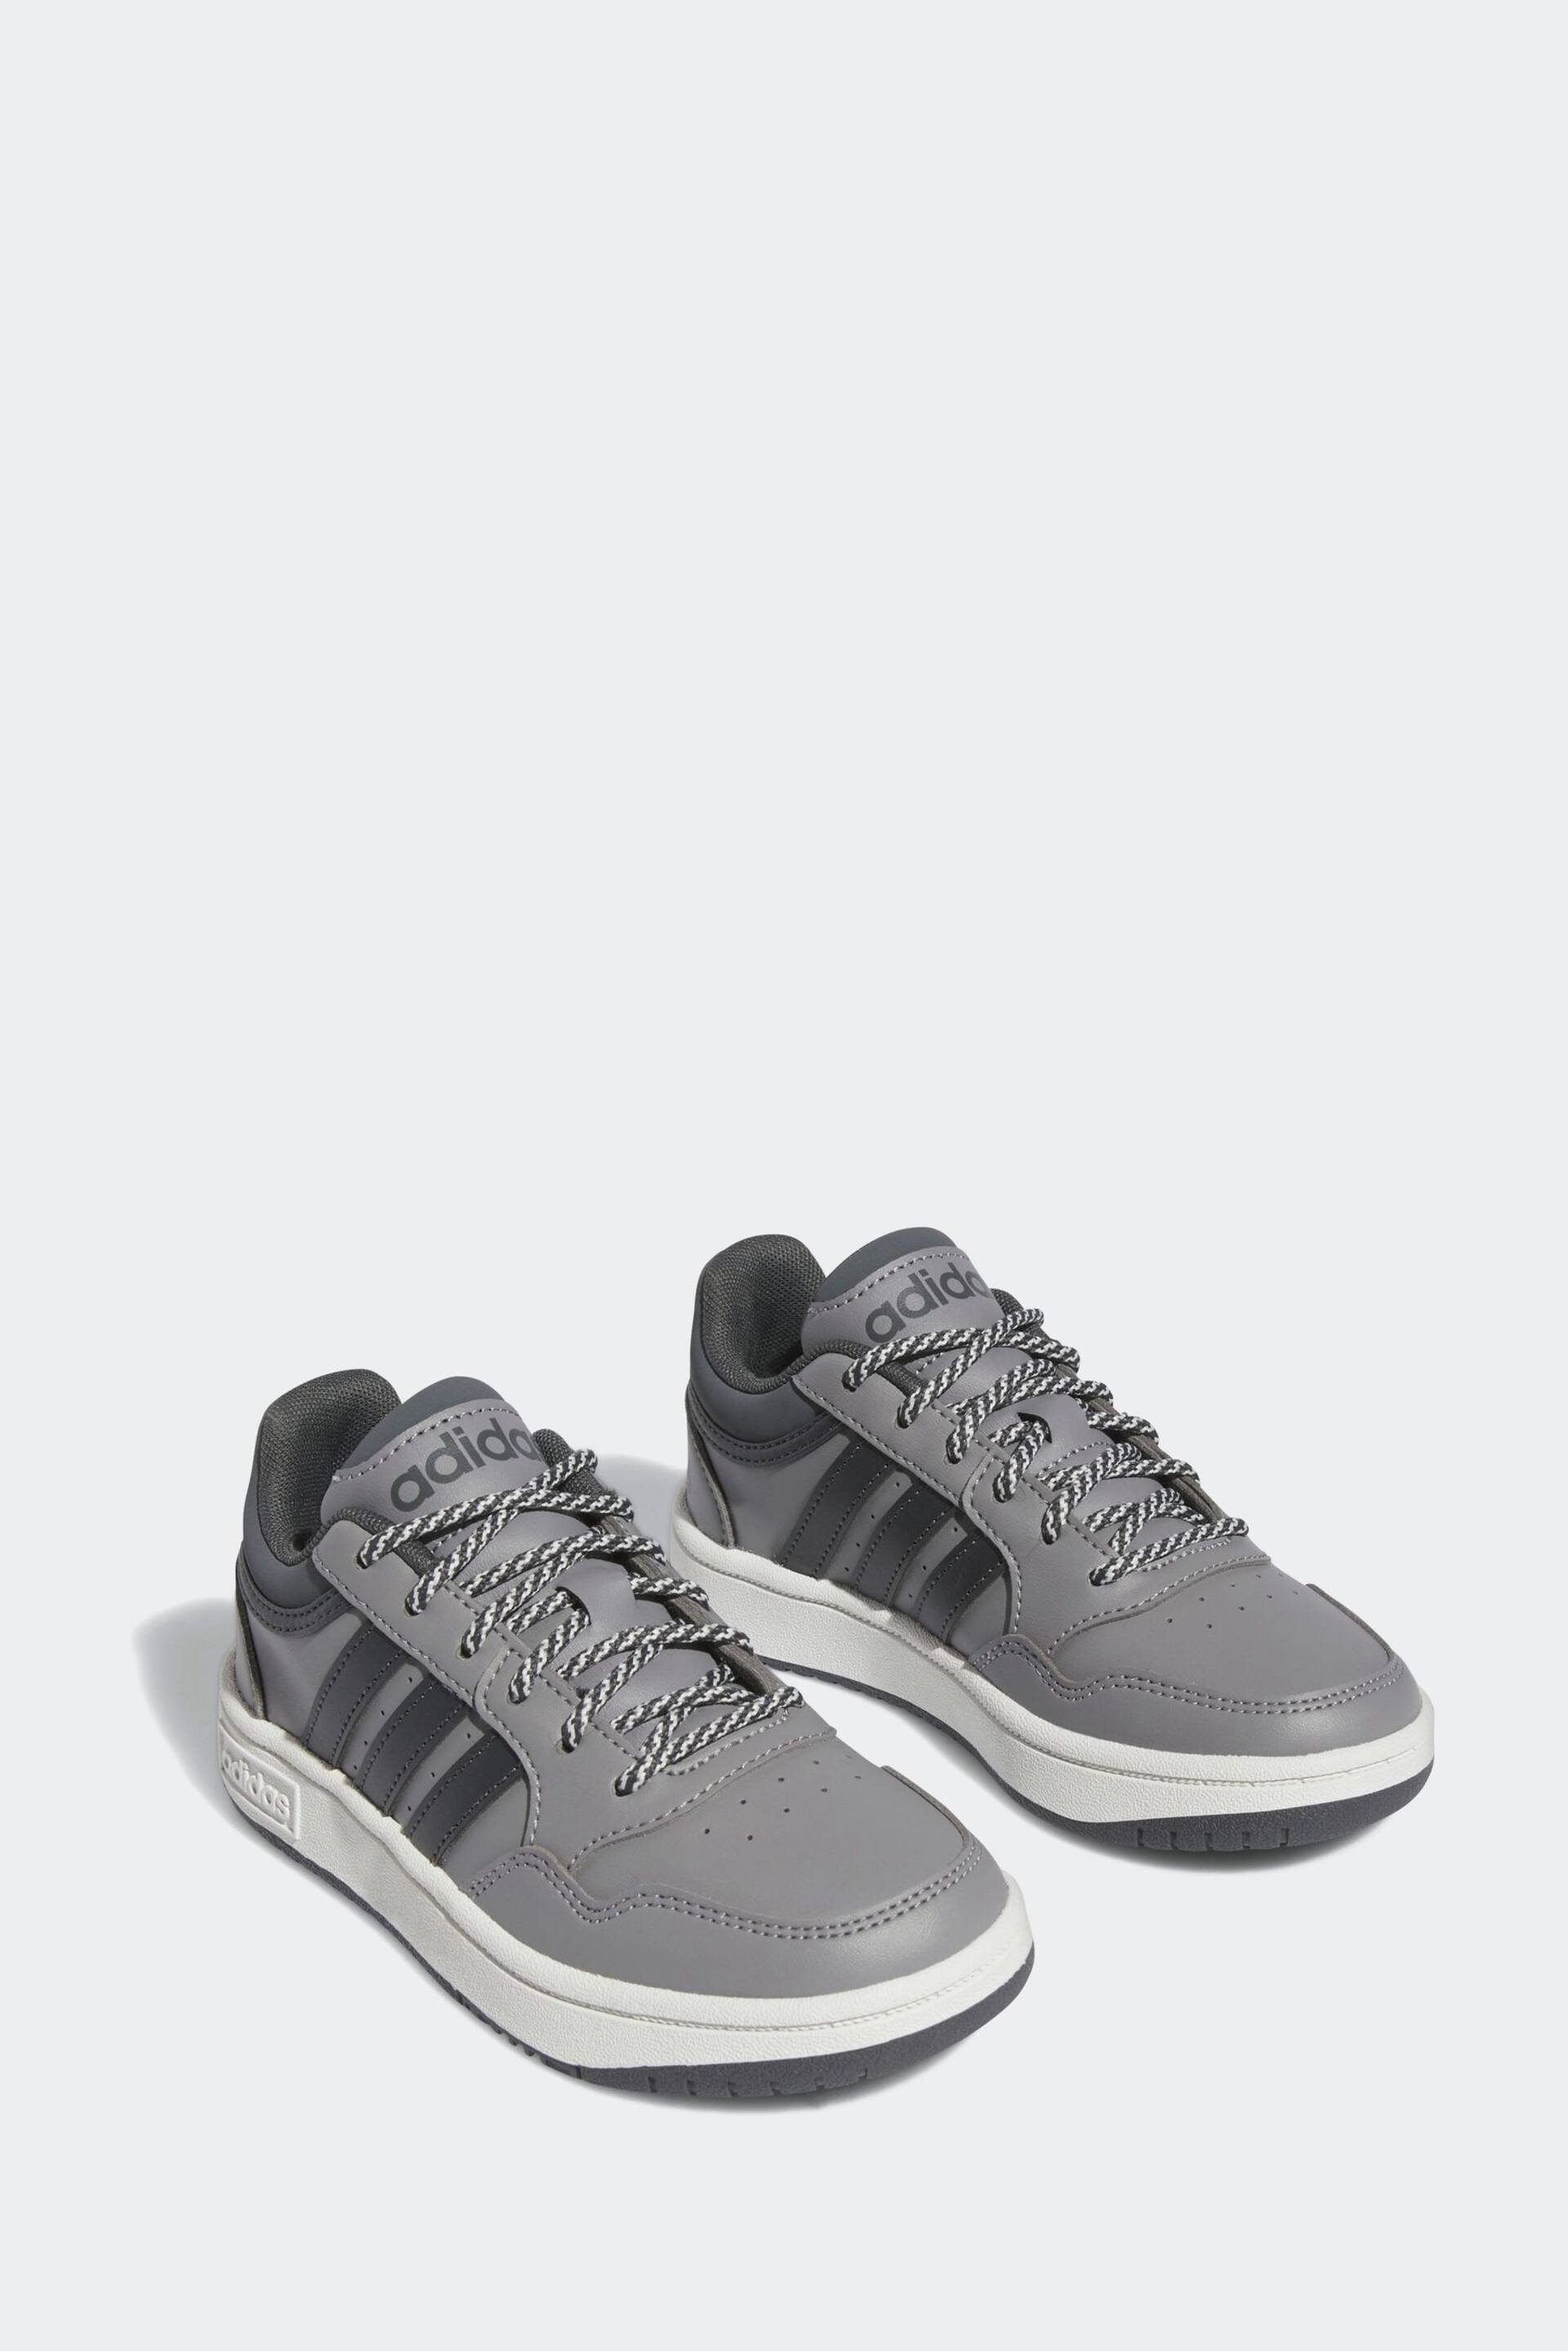 adidas Grey Hoops Trainers - Image 3 of 6